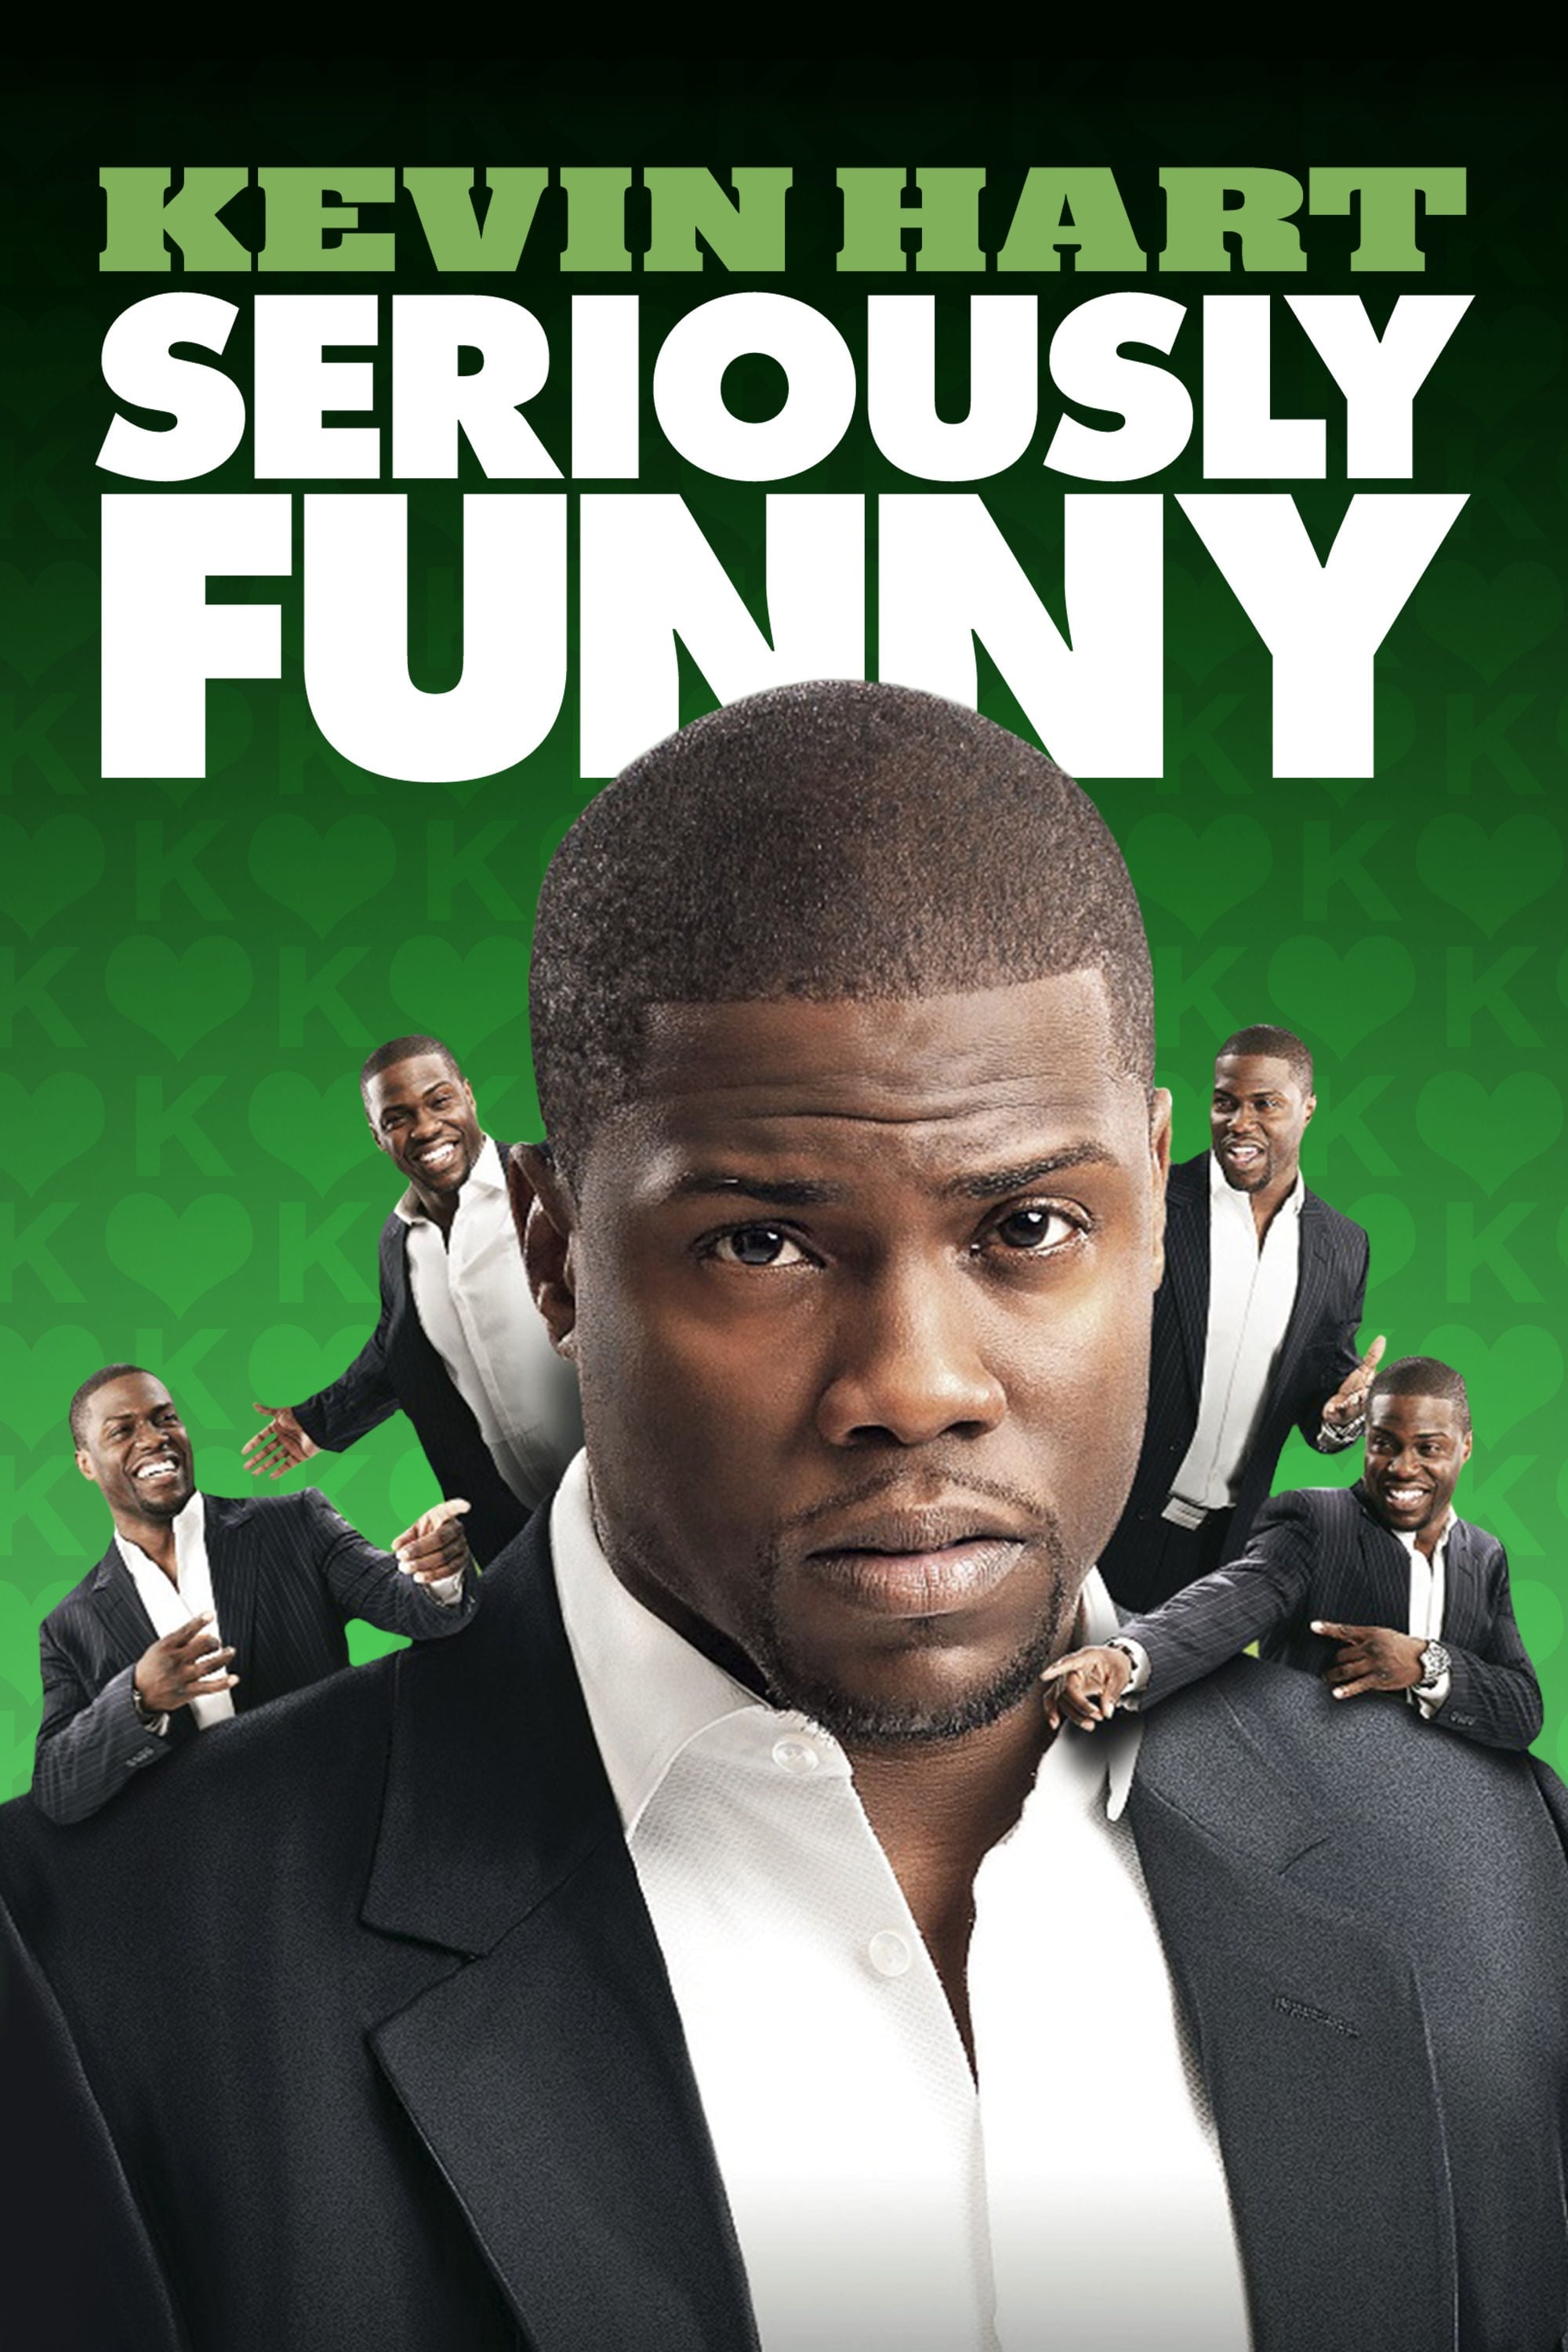 Kevin Hart: Seriously Funny - 123movies | Watch Online Full Movies TV